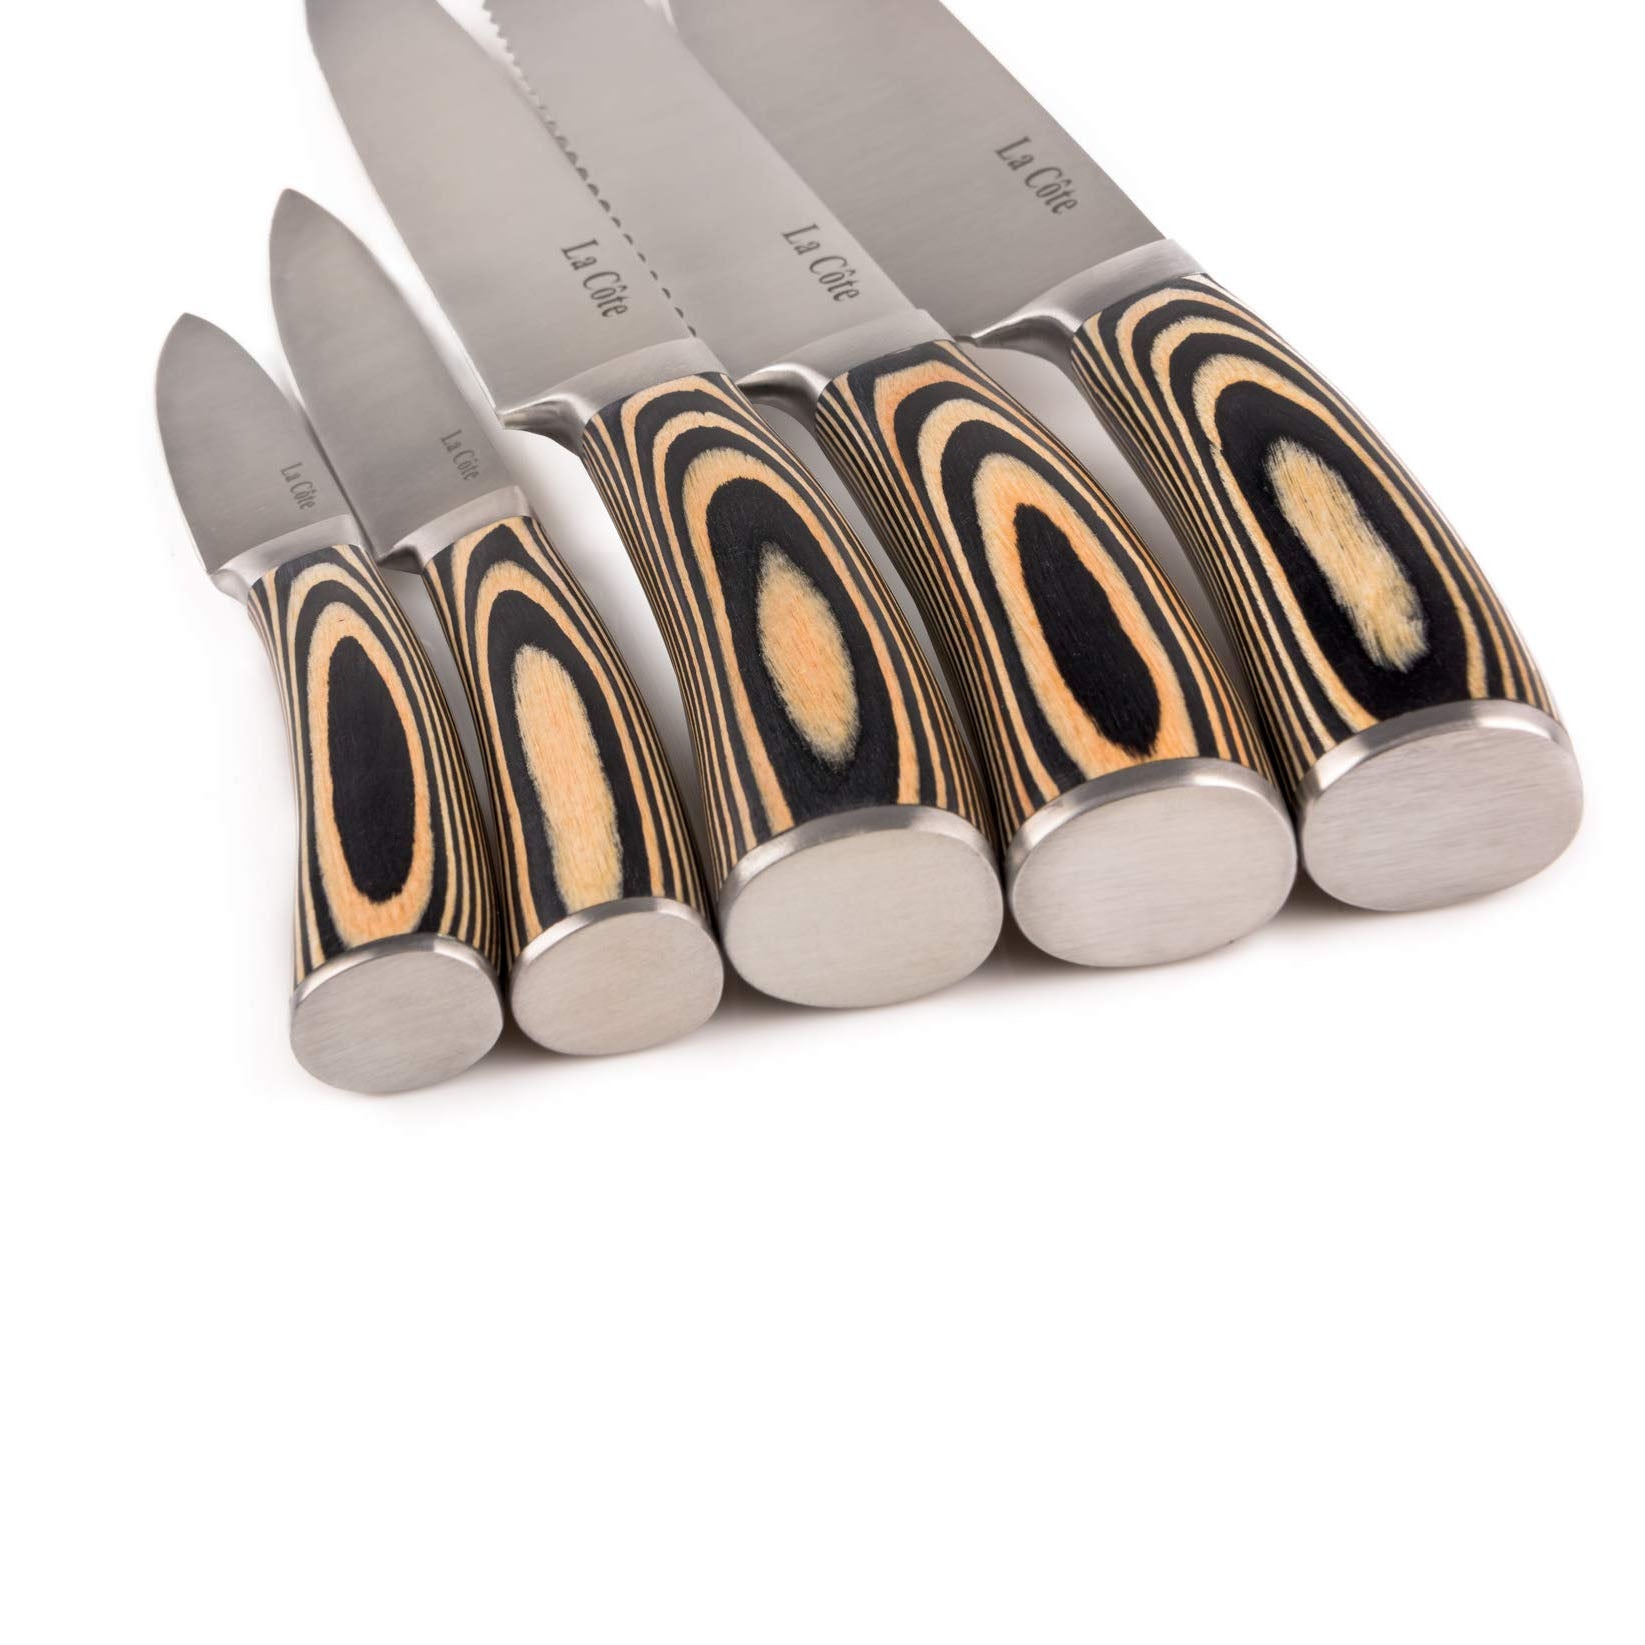 La Cote 5 Piece Chef Knives Set Japanese Stainless Steel Pakka Wood Handle In Gift Box (5 PC Chef Knife Set)